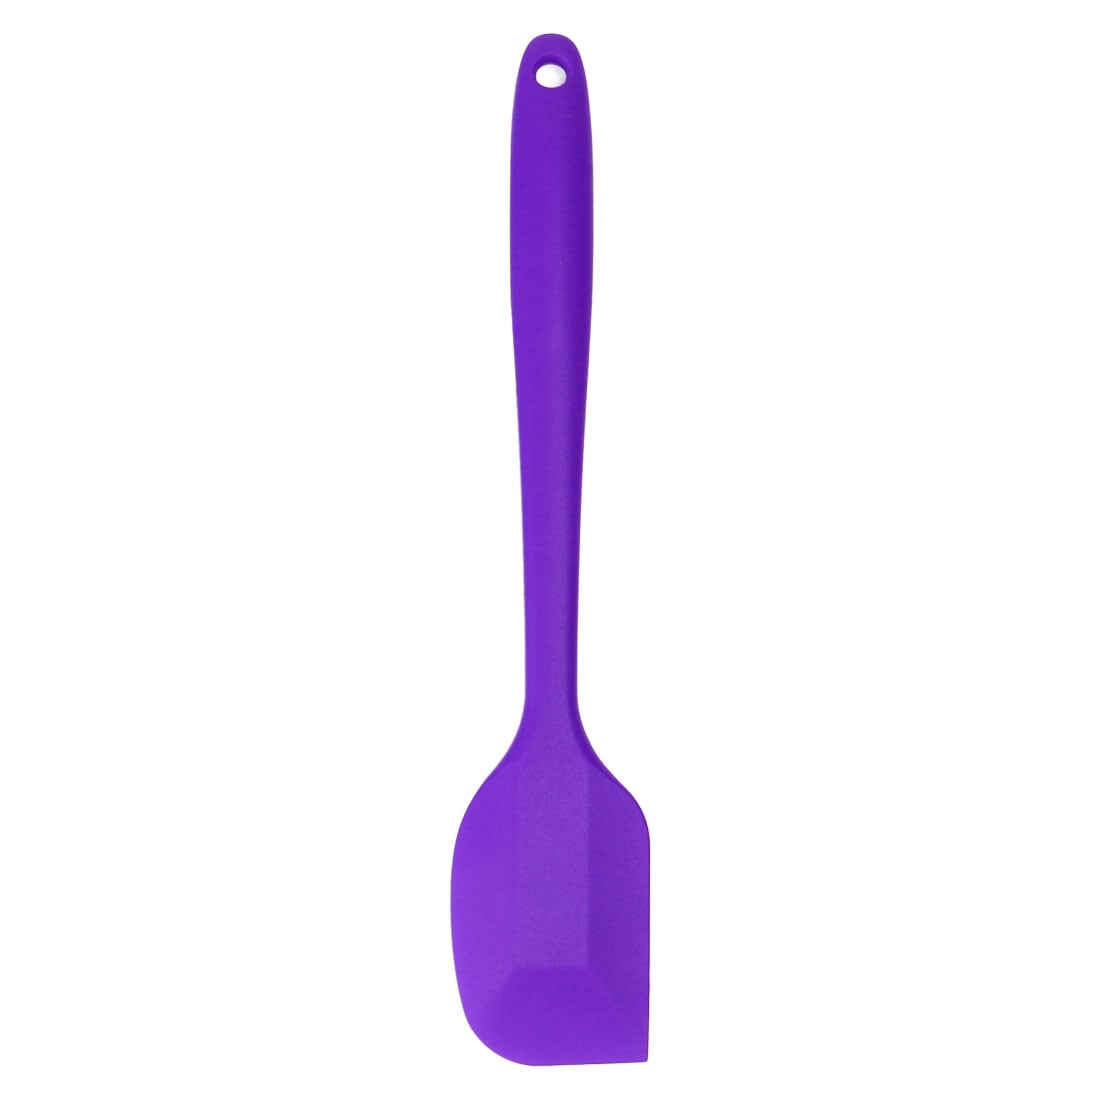 https://ak1.ostkcdn.com/images/products/is/images/direct/91d976b18fd7a5f3267e9302c5846932fe1e7c47/Silicone-Spatula-Heat-Resistant-Kitchen-Turner-Jar-Scraper-Non-Stick-Spatula-for-Cooking-Baking-and-Mixing-Purple.jpg